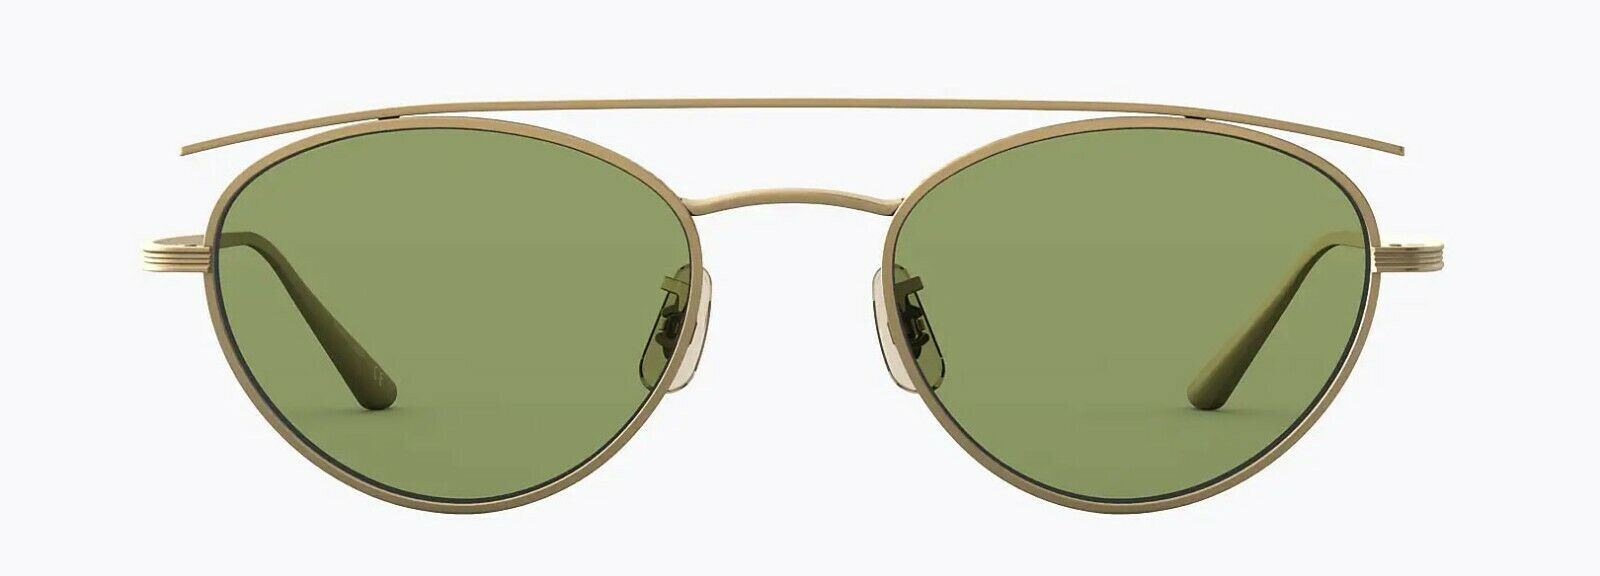 Oliver Peoples Sunglasses 1258ST 528452 The Row Hightree Antique Gold / Green C-827934432642-classypw.com-2